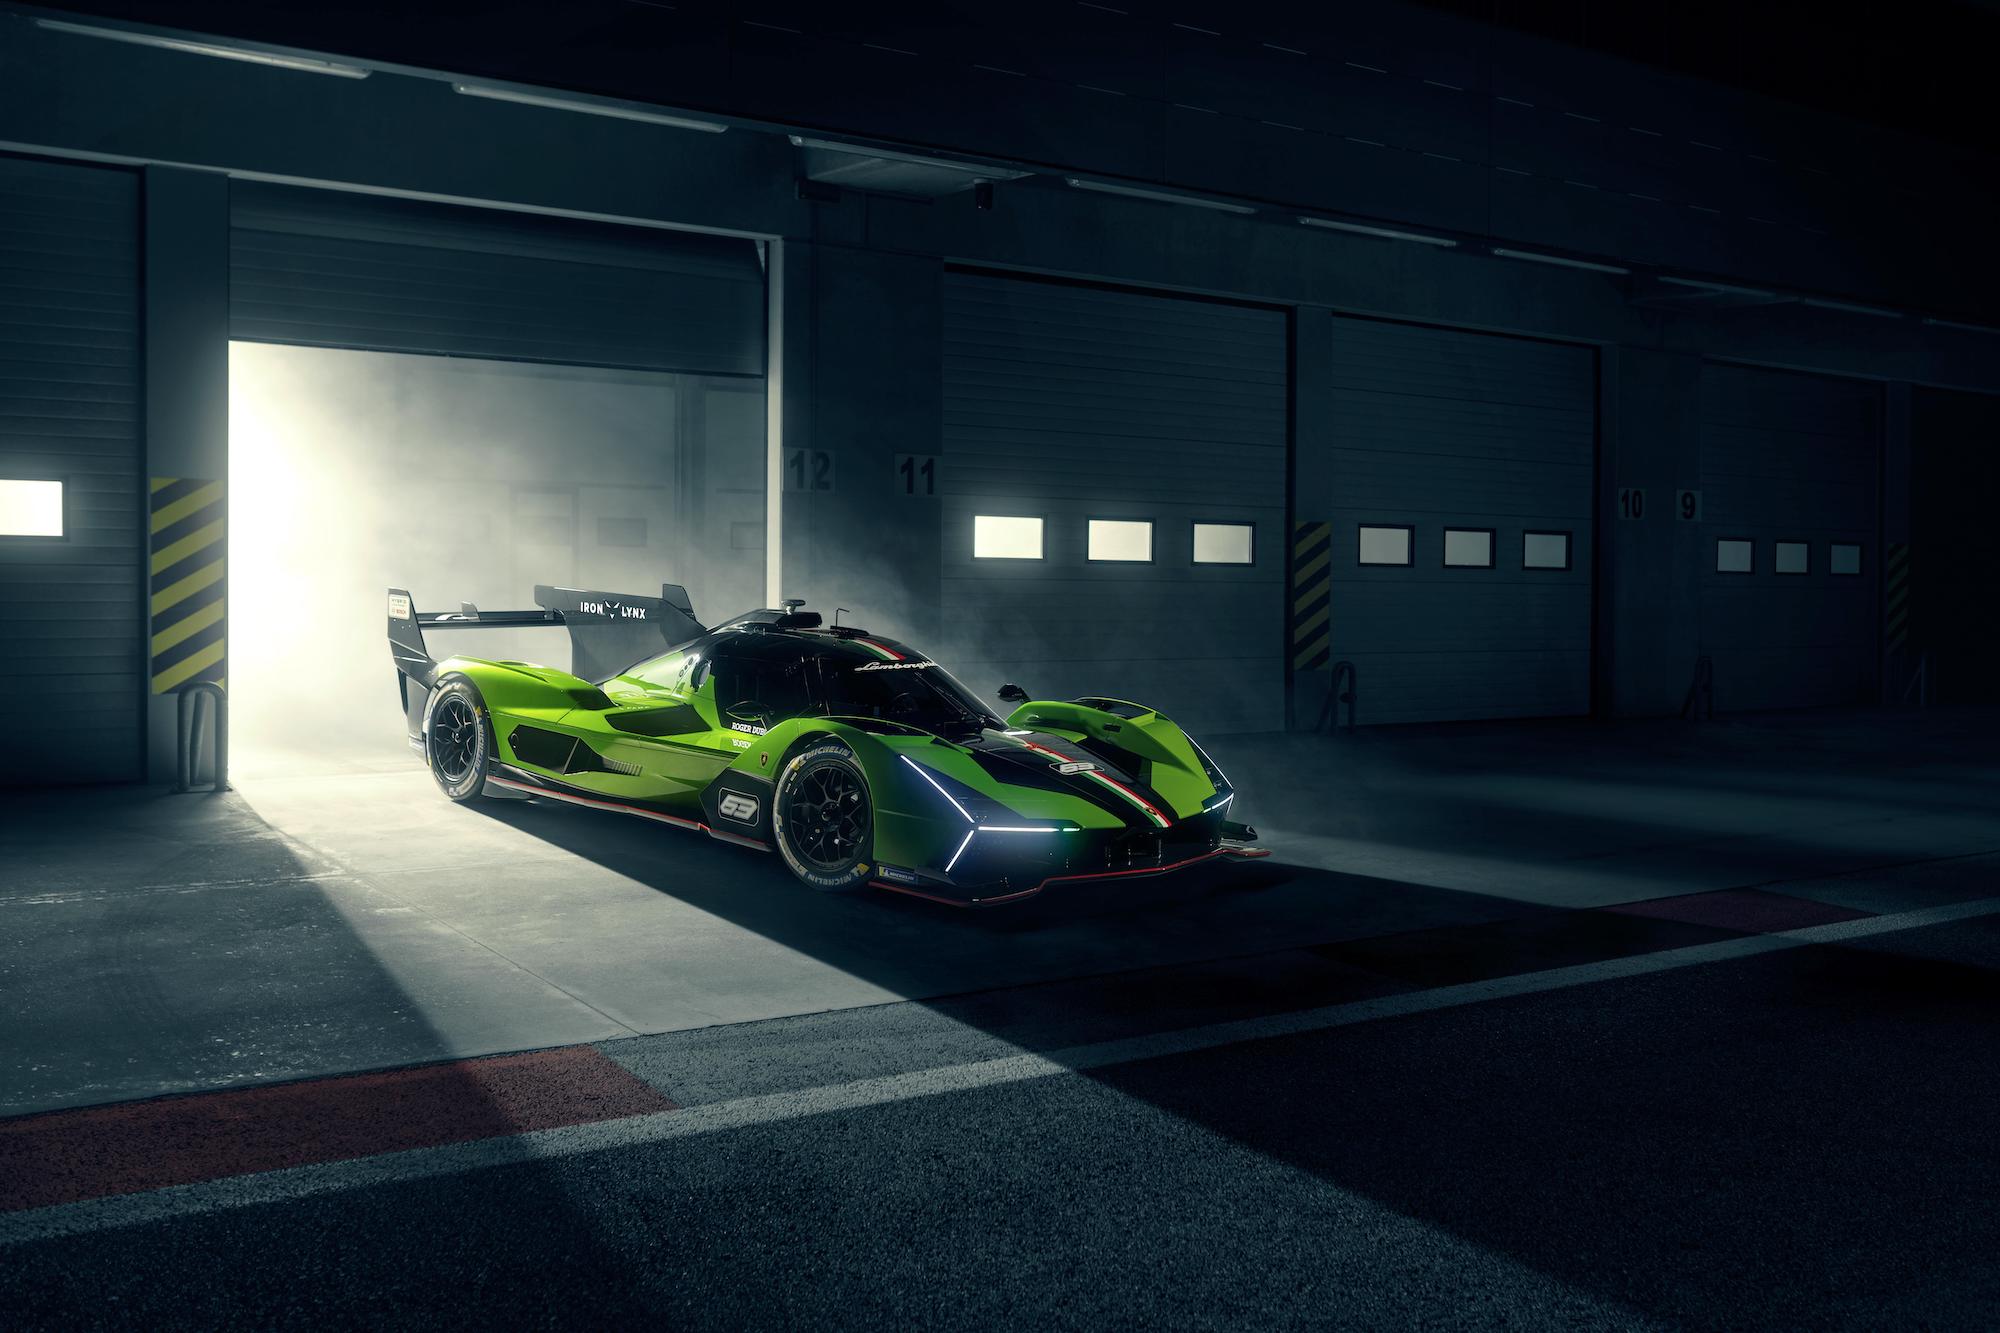 a green race car emerges from a garage on a dark night 